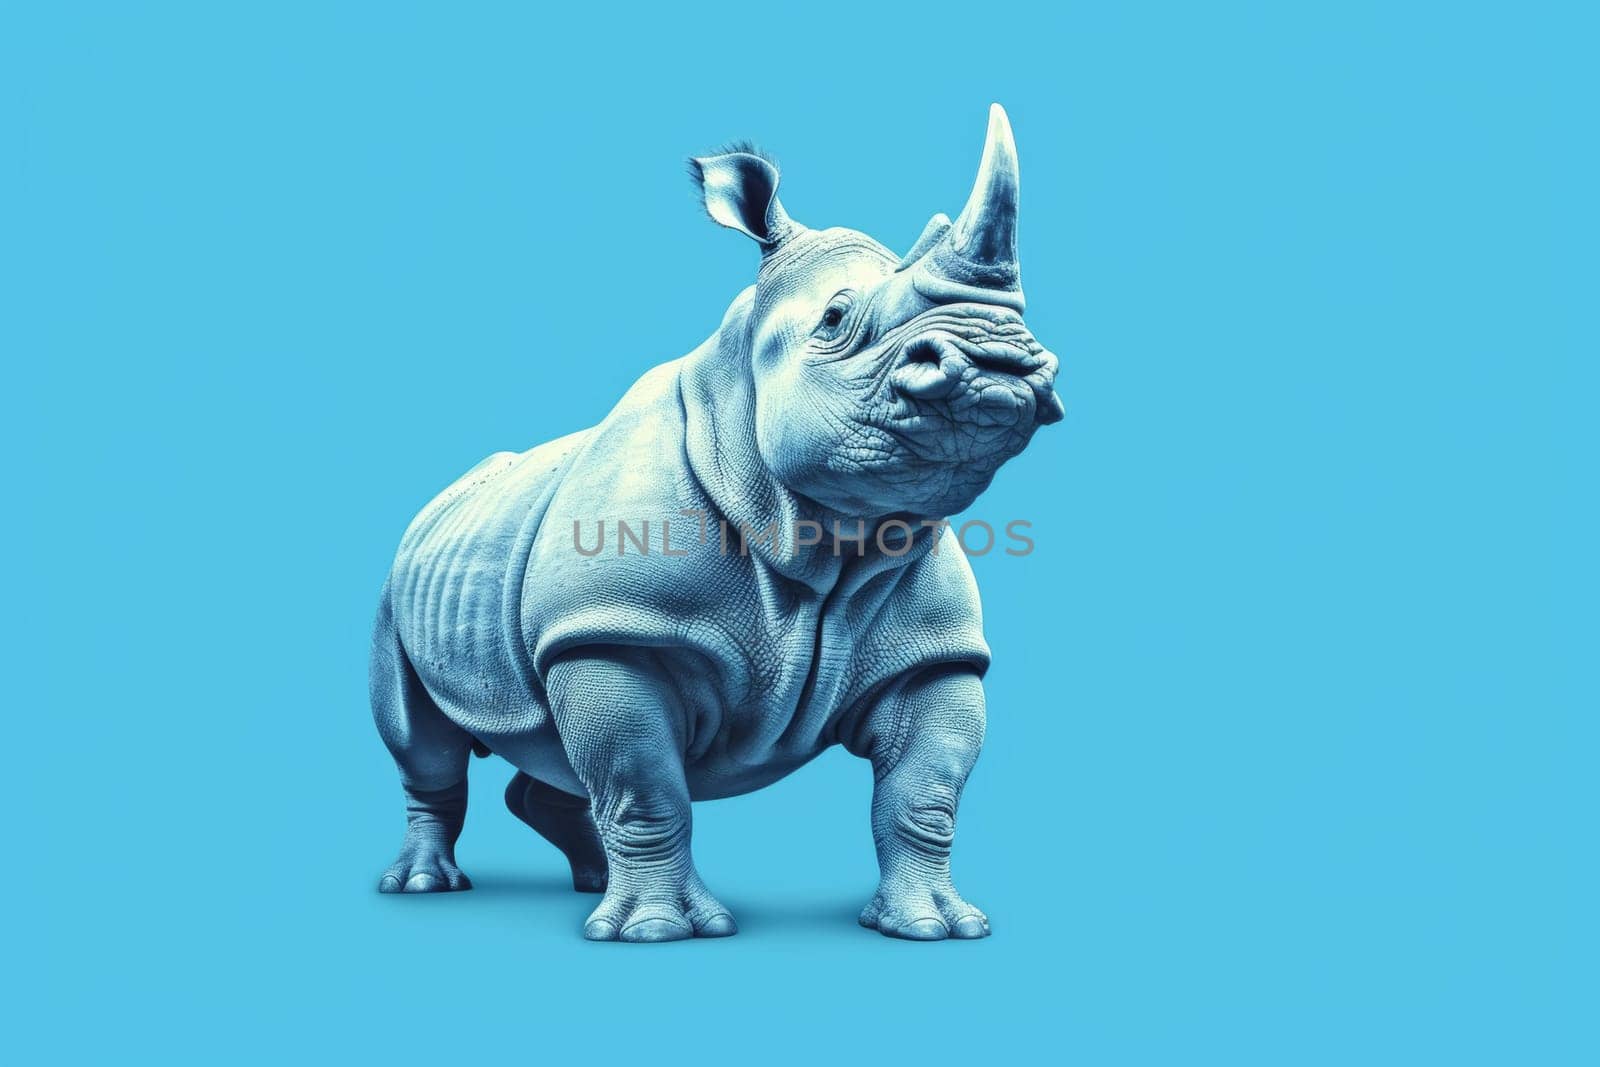 This digital art piece features a rhinoceros with exaggerated muscularity in a power stance, presented against a solid blue background, embodying power and resilience